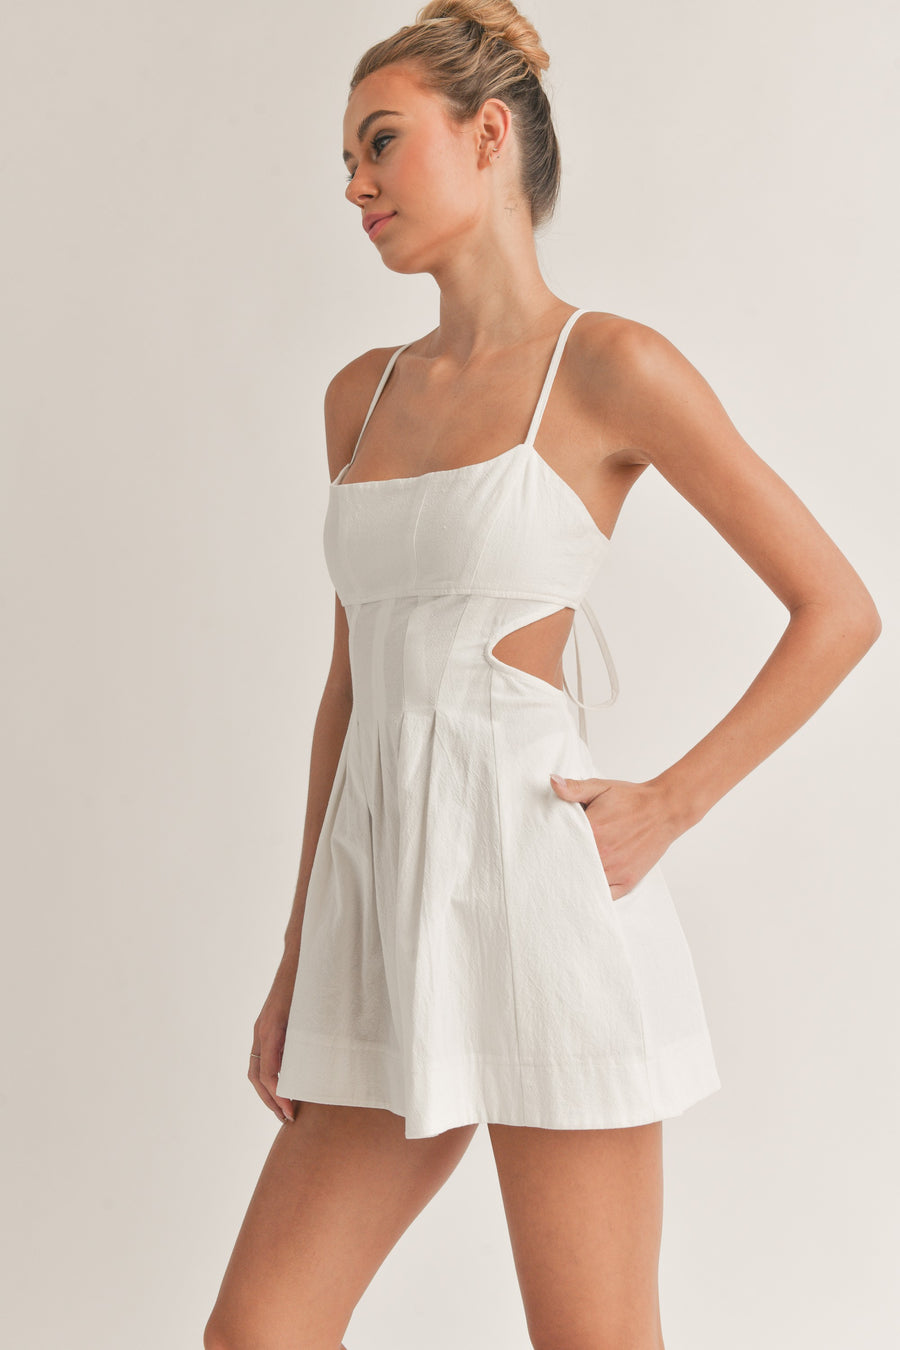 Off white mini dress with cut open back.